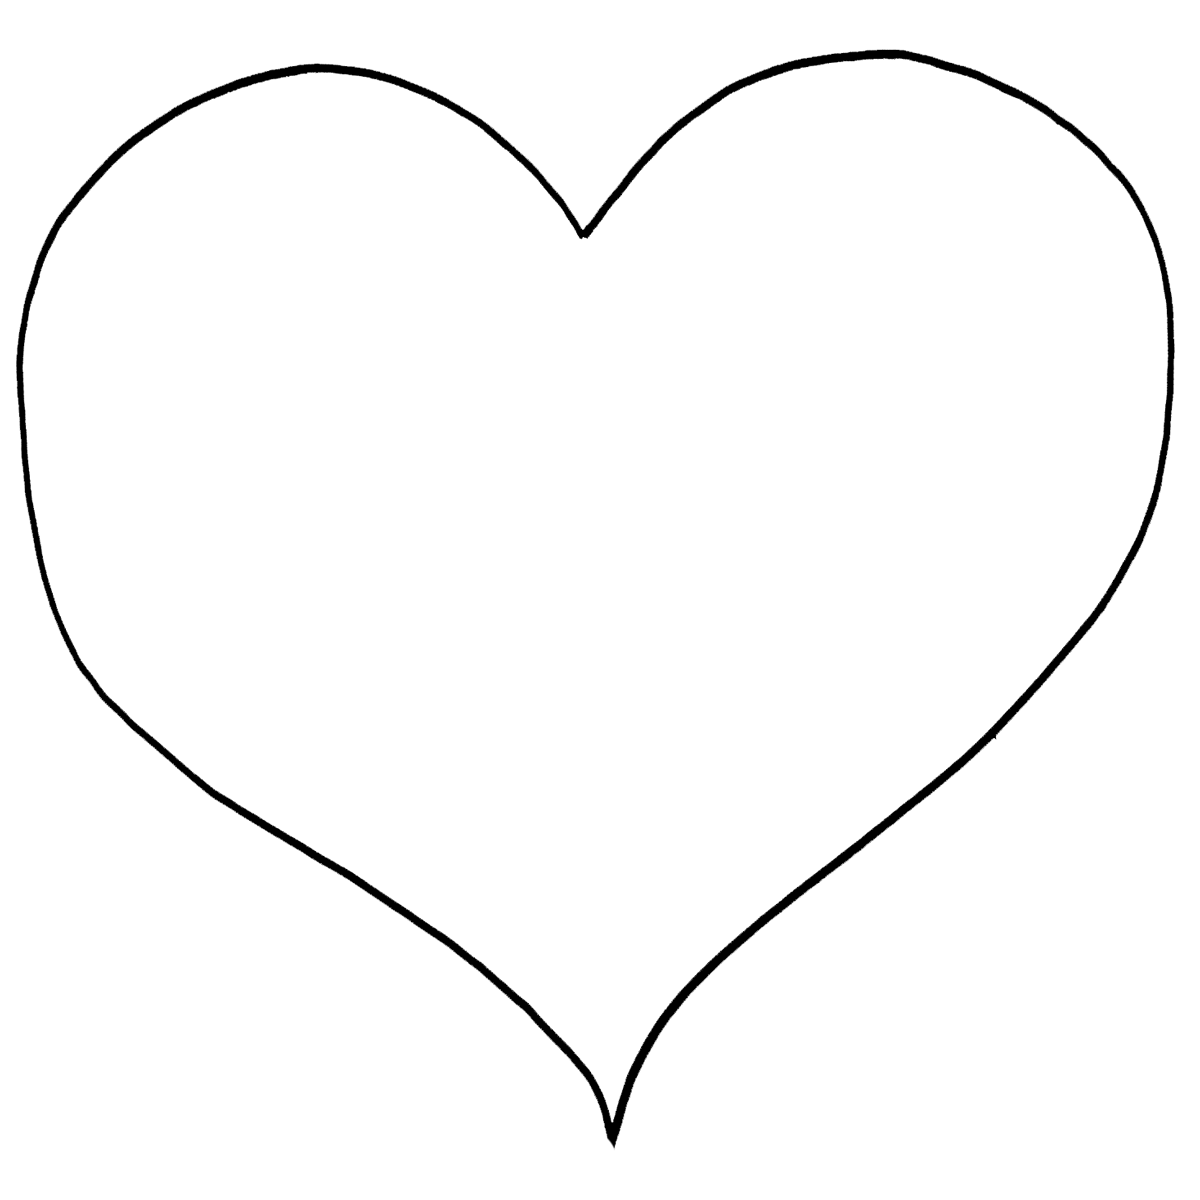 heart coloring pages 35 free printable heart coloring pages heart coloring pages 